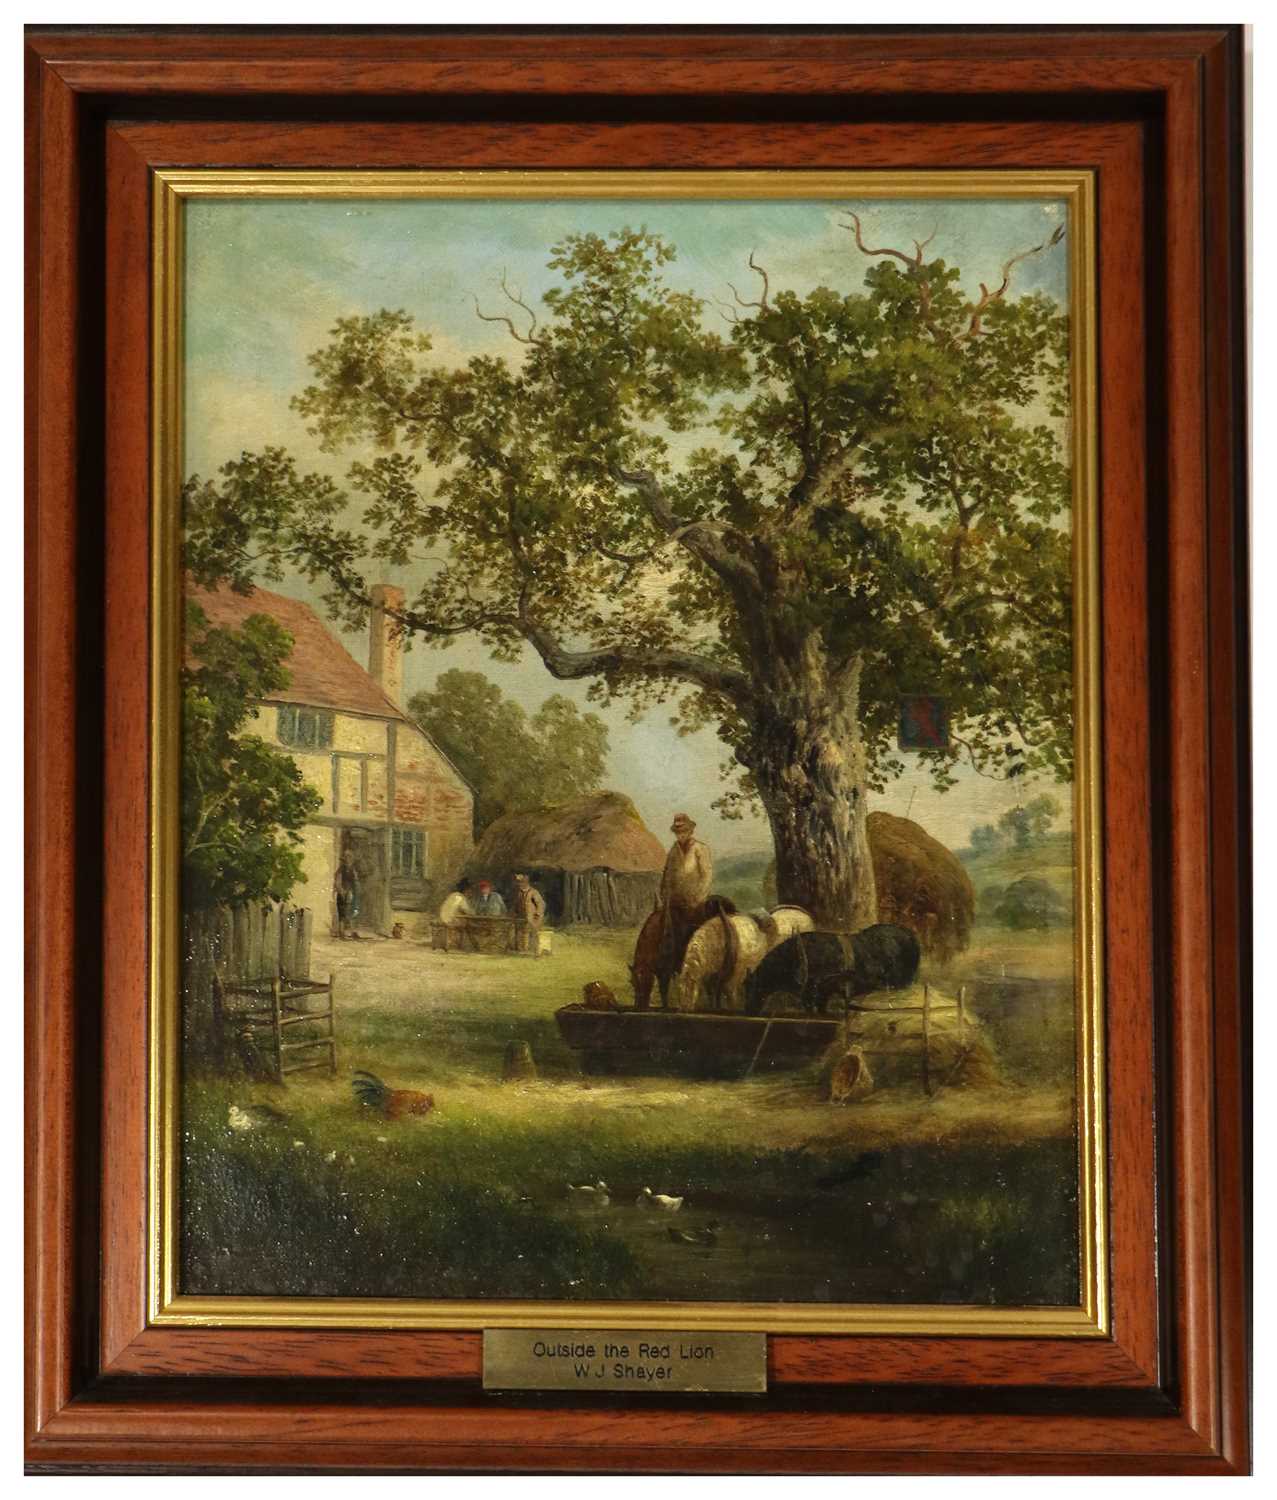 Attributed to William Shayer (1811-1892) Outside the Red Lion Oil on canvas, 29cm by 24cm - Image 3 of 3